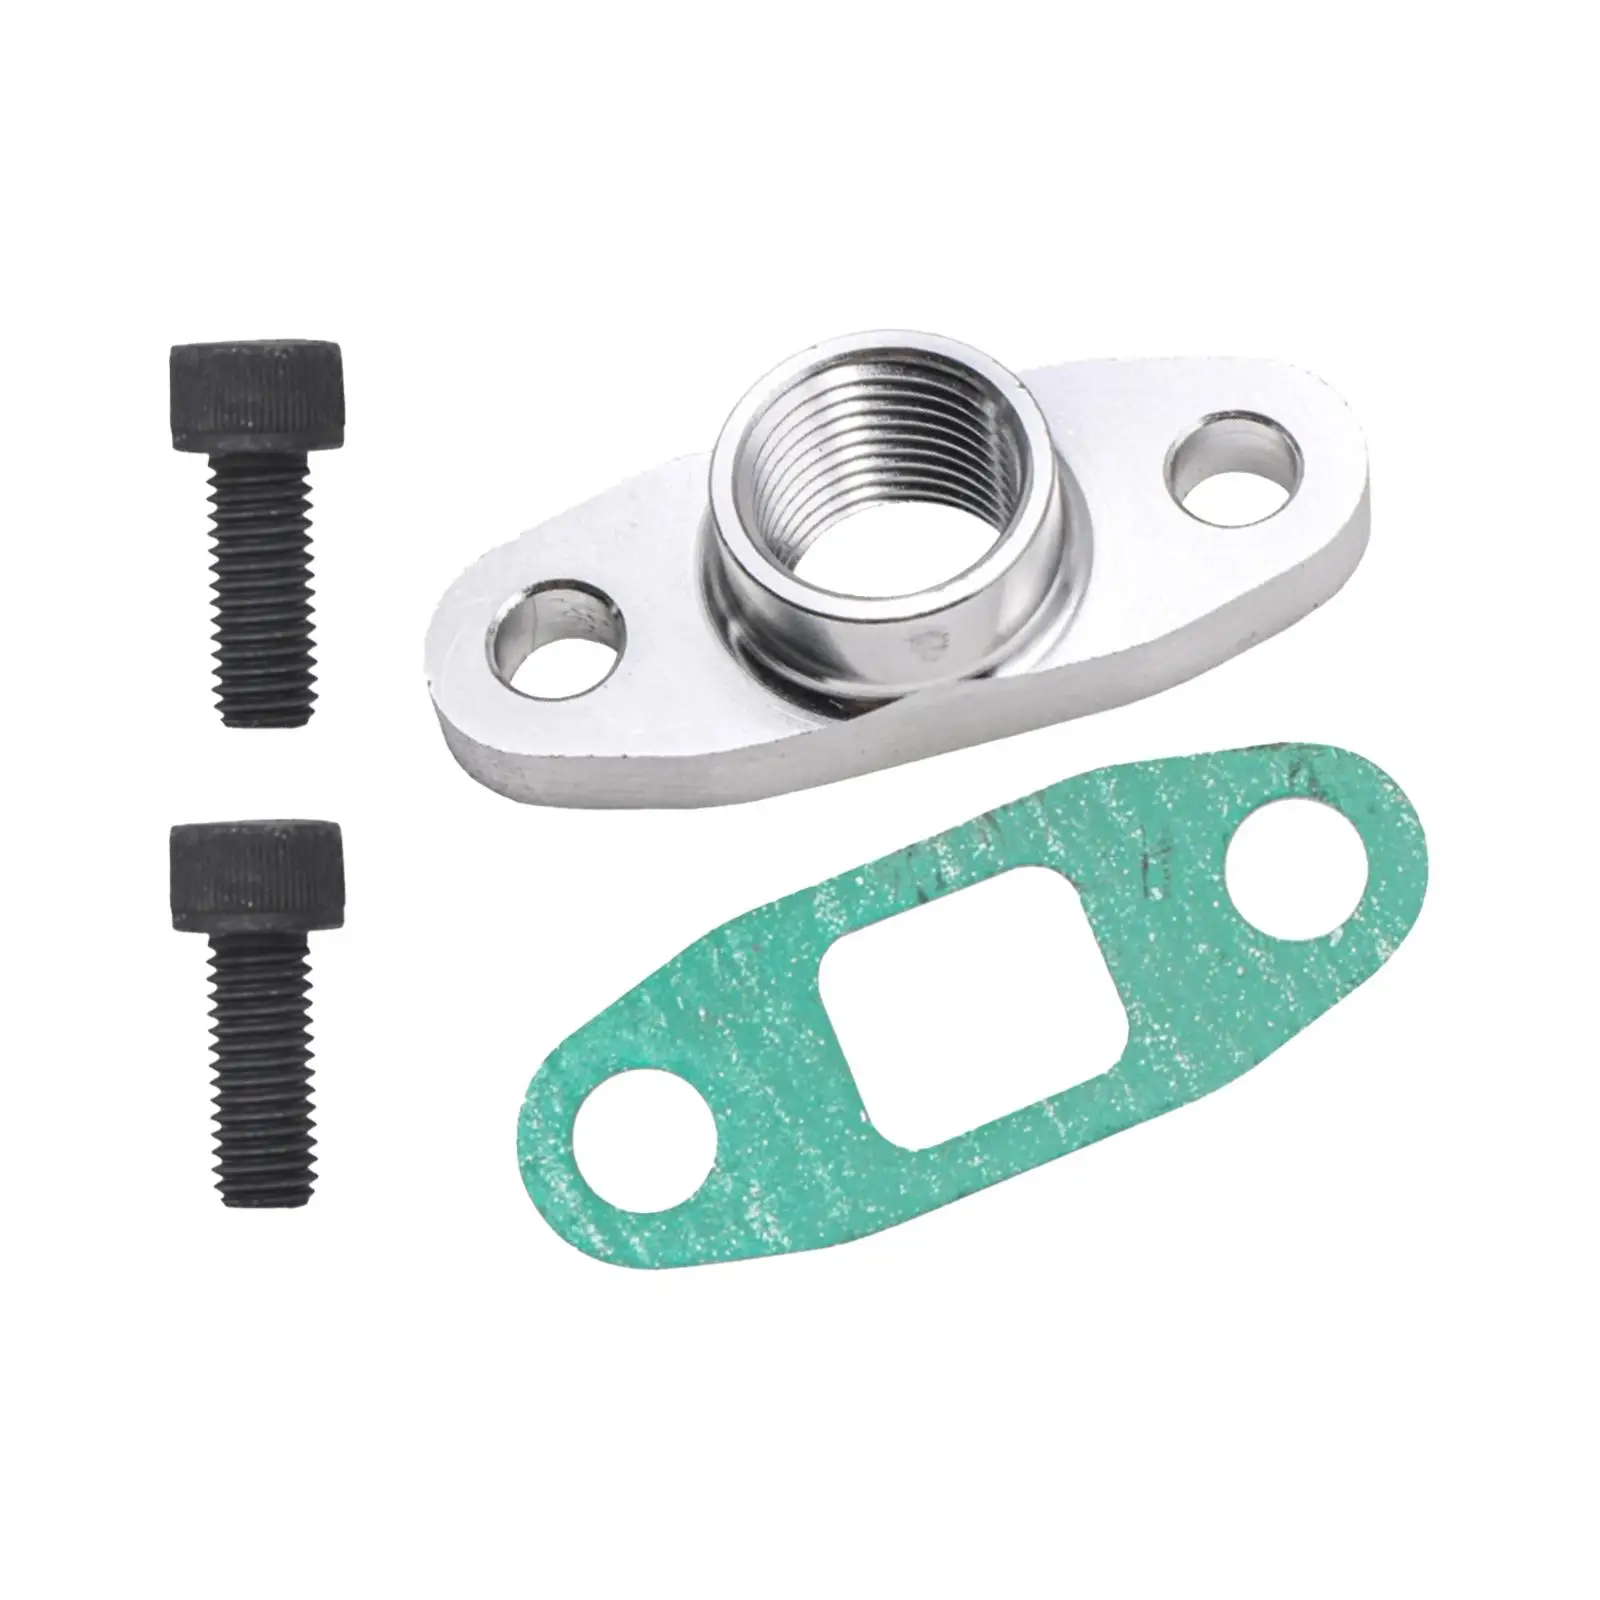 Oil Drain Outlet Flange Gasket Adapter Set with Bolts Durable Accessory AN10 Fitting Aluminum Alloy for T3 T66 GT30